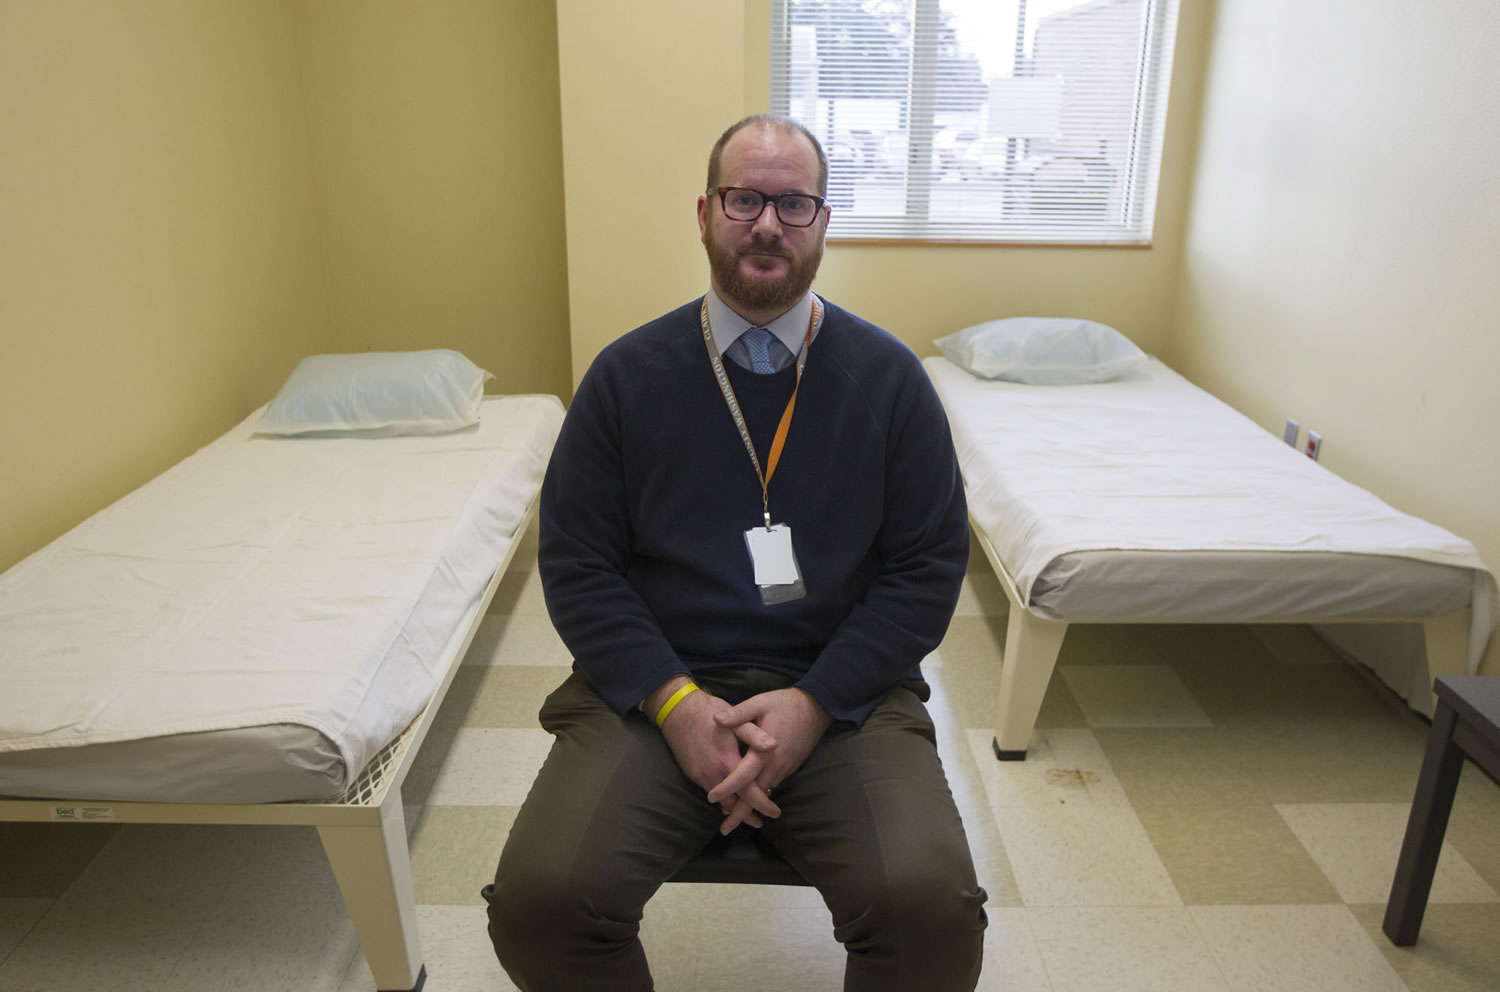 Lifeline Connections executive director Jared Sanford sits in a remodeled bedroom in the new &quot;sobering center&quot; on the ground floor of the Center for Community Health.